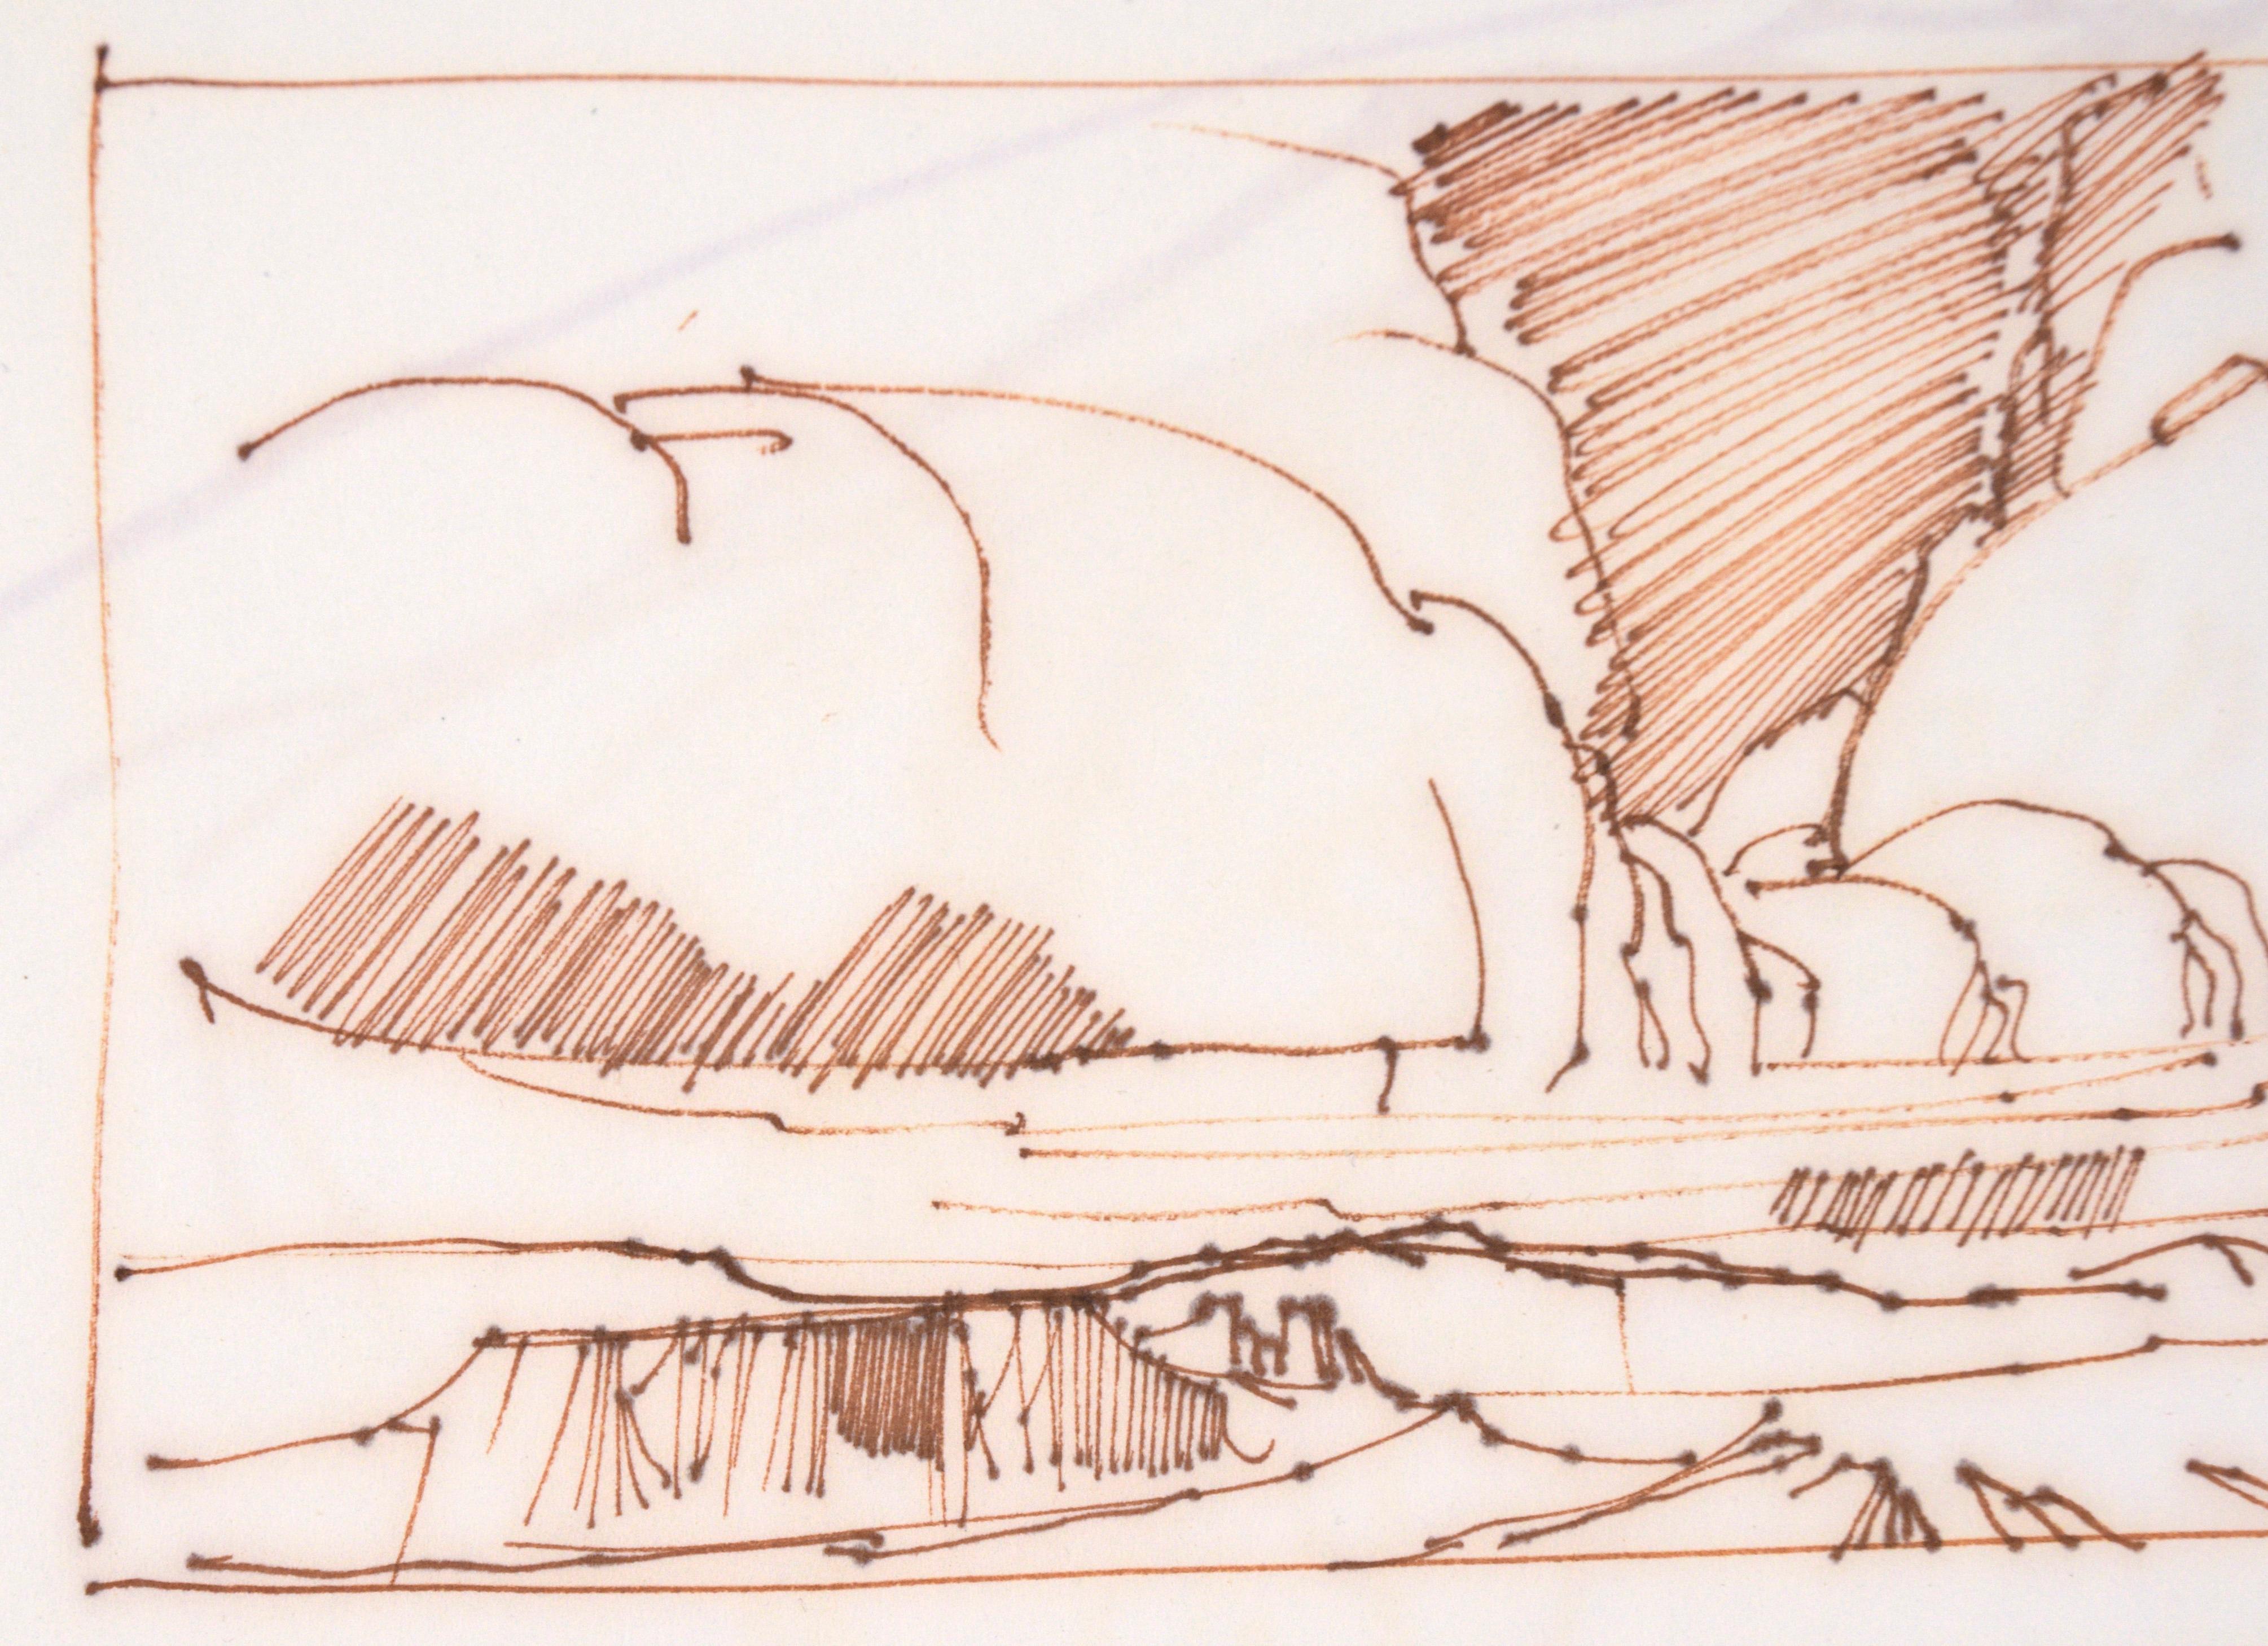 Two High Desert Landscapes - Line Drawing in Sepia-Toned Ink on Paper - Orange Landscape Art by Laurence Sisson